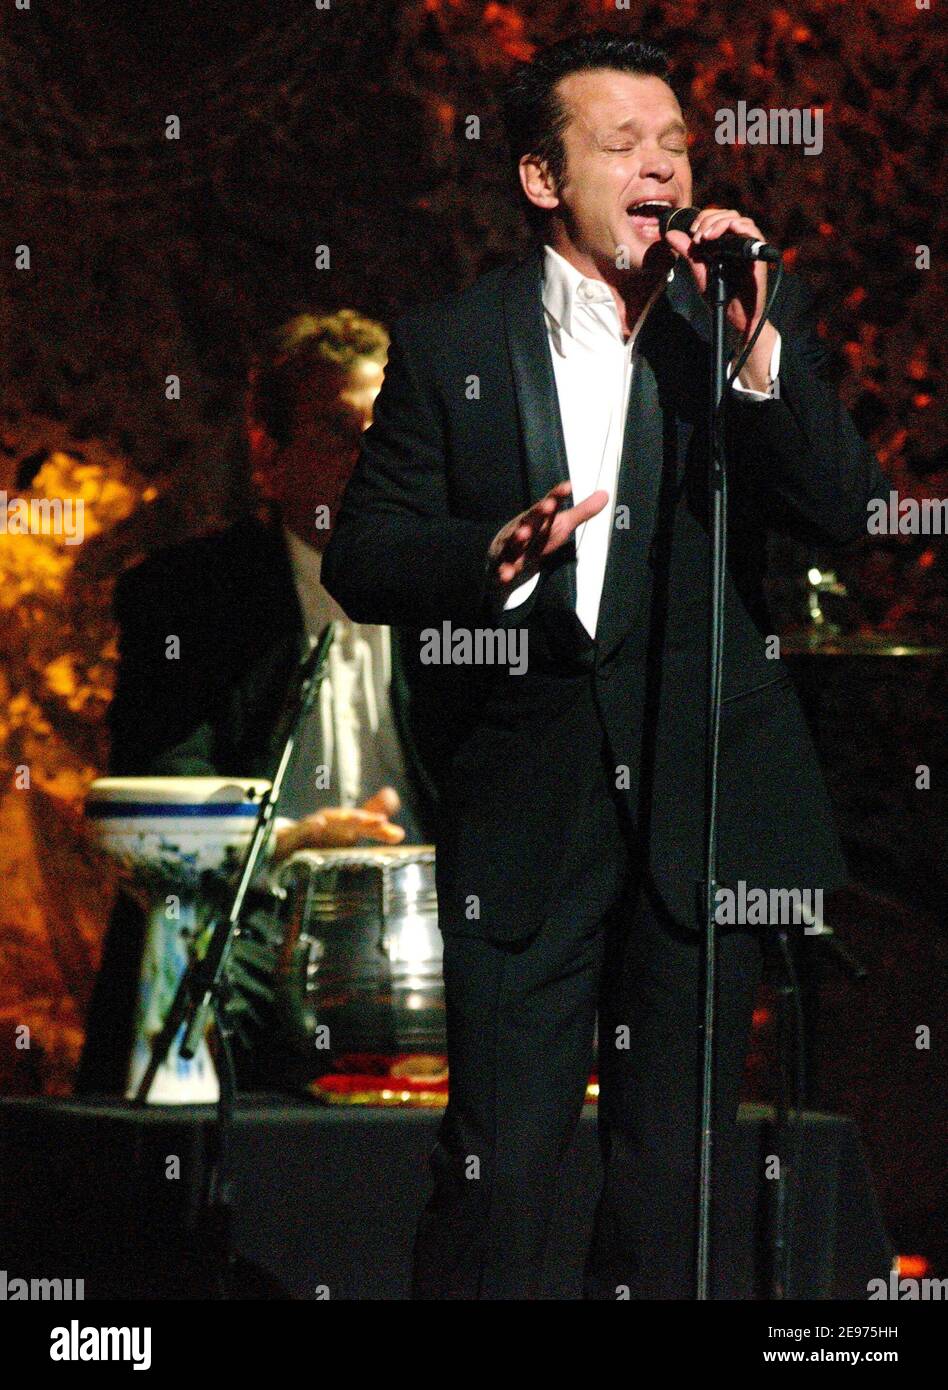 John Mellencamp performing during 'Willie Nelson & Friends Live and Kickin'' at the Beacon Theatre in New York City© David Atlas//MediaPunch April 9, 2003 Stock Photo